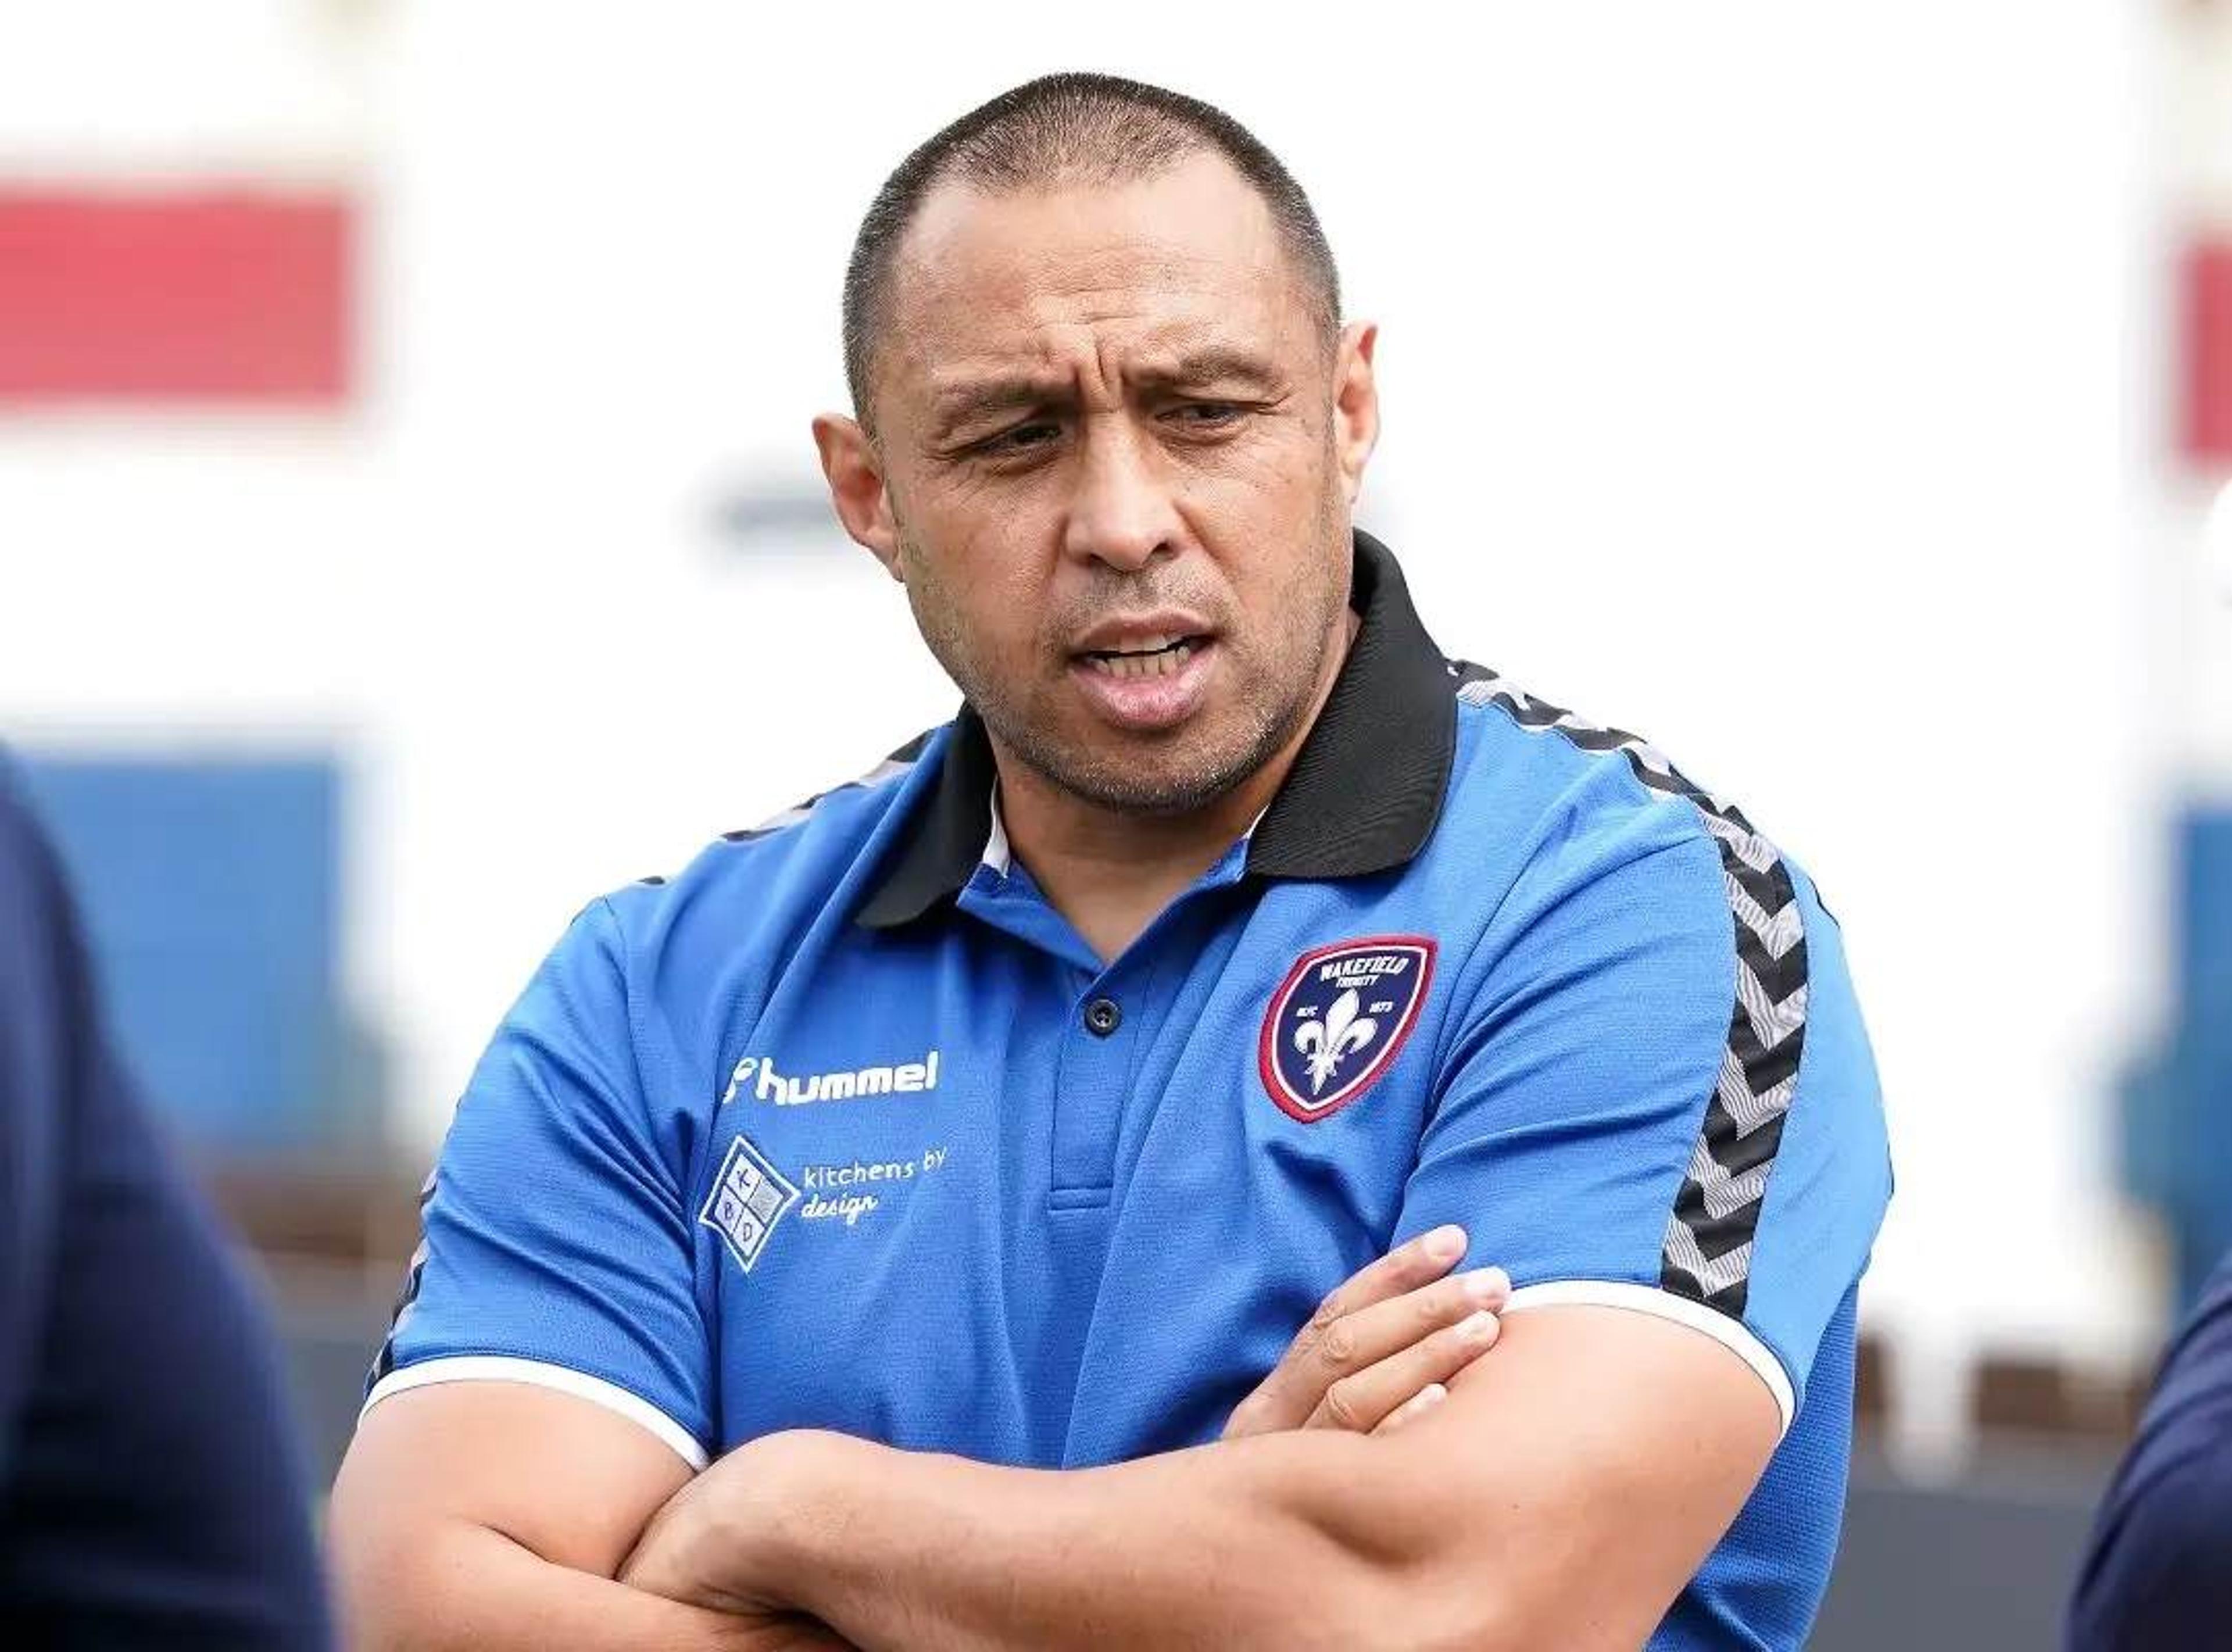 Willie Poching is returning to help coach Toa Samoa after last working with the team in 2009.